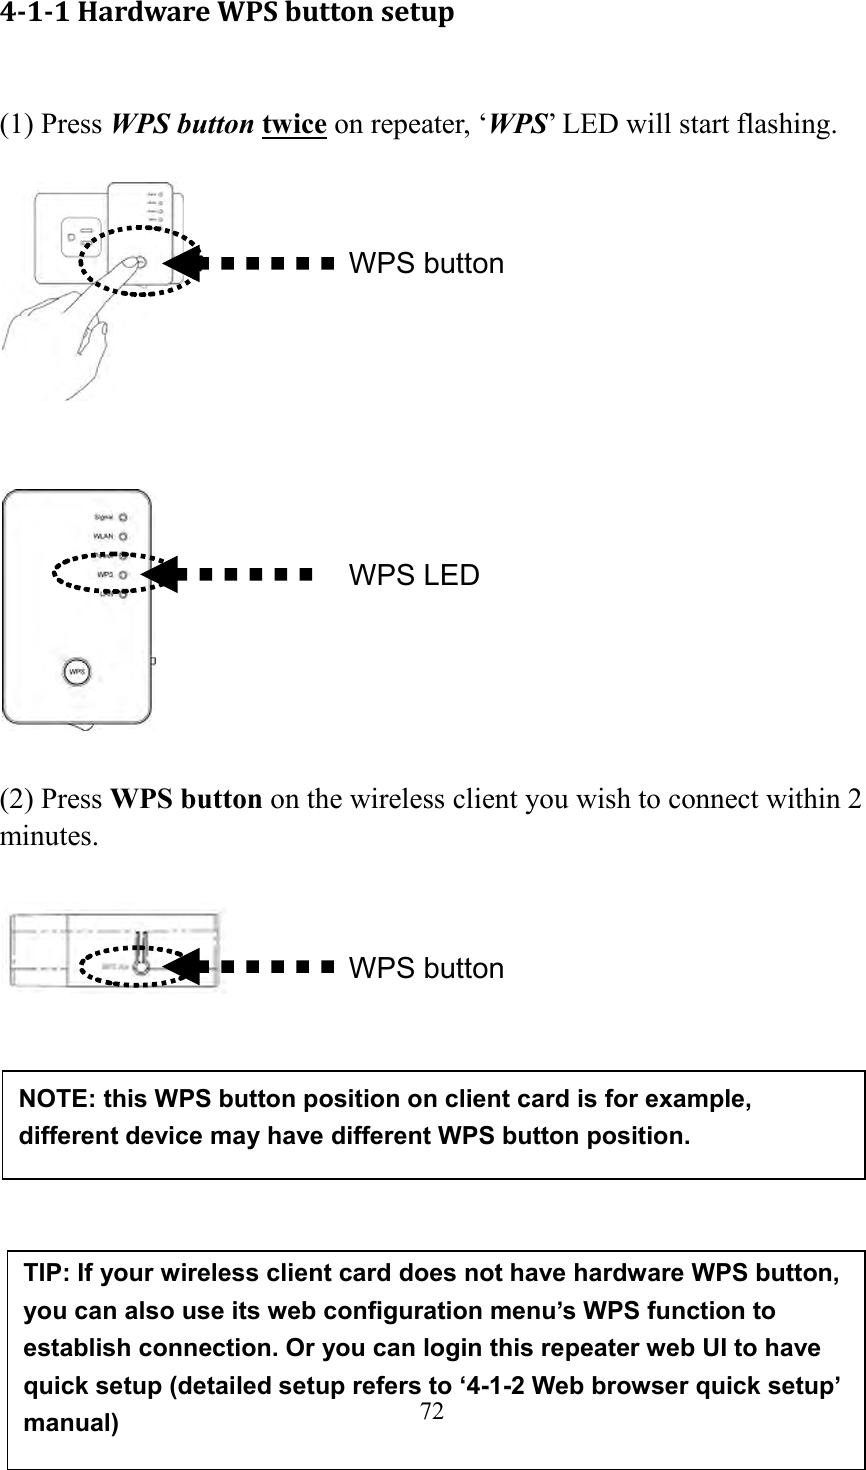  72  4-1-1 Hardware WPS button setup  (1) Press WPS button twice on repeater, ‘WPS’ LED will start flashing.       (2) Press WPS button on the wireless client you wish to connect within 2 minutes.               WPS LED WPS button NOTE: this WPS button position on client card is for example, different device may have different WPS button position. TIP: If your wireless client card does not have hardware WPS button, you can also use its web configuration menu’s WPS function to establish connection. Or you can login this repeater web UI to have quick setup (detailed setup refers to ‘4-1-2 Web browser quick setup’ manual) WPS button 